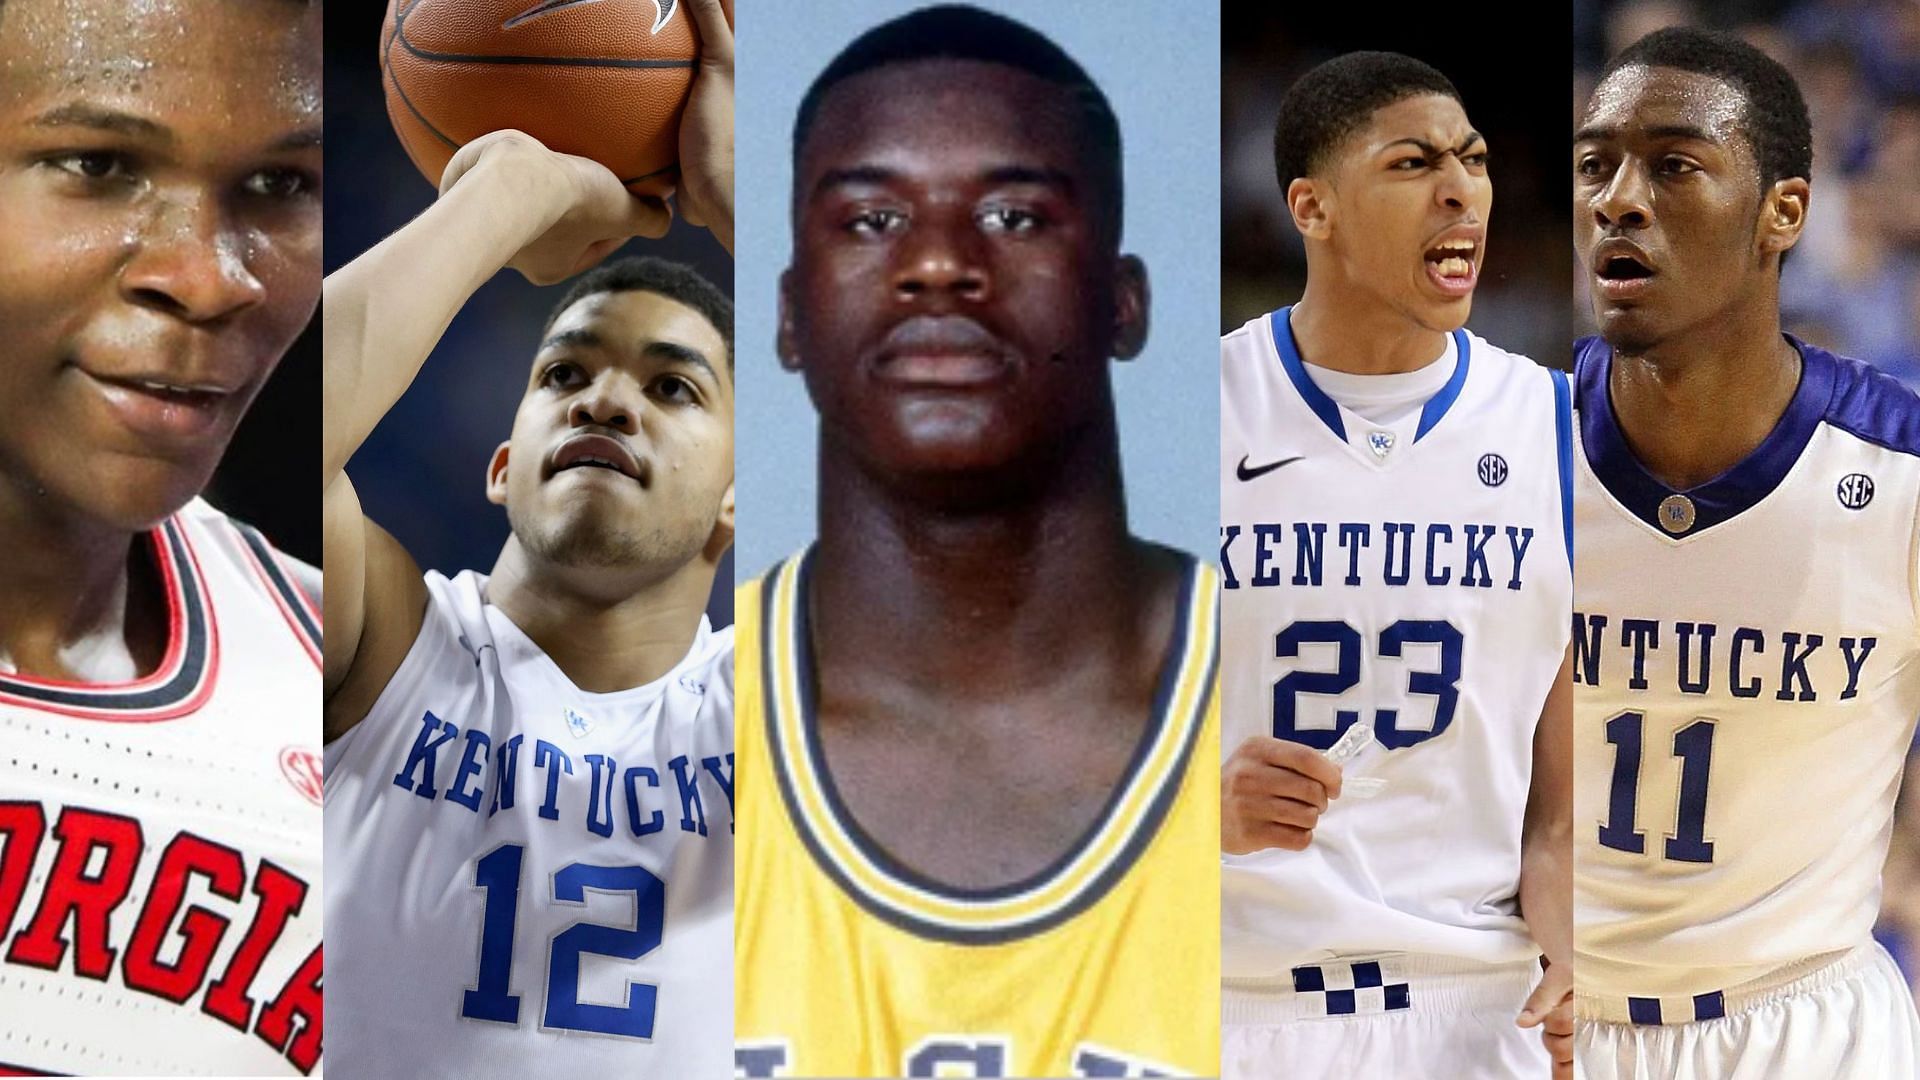 From left to right: Anthony Edwards, Karl-Anthony Towns, Shaquille O